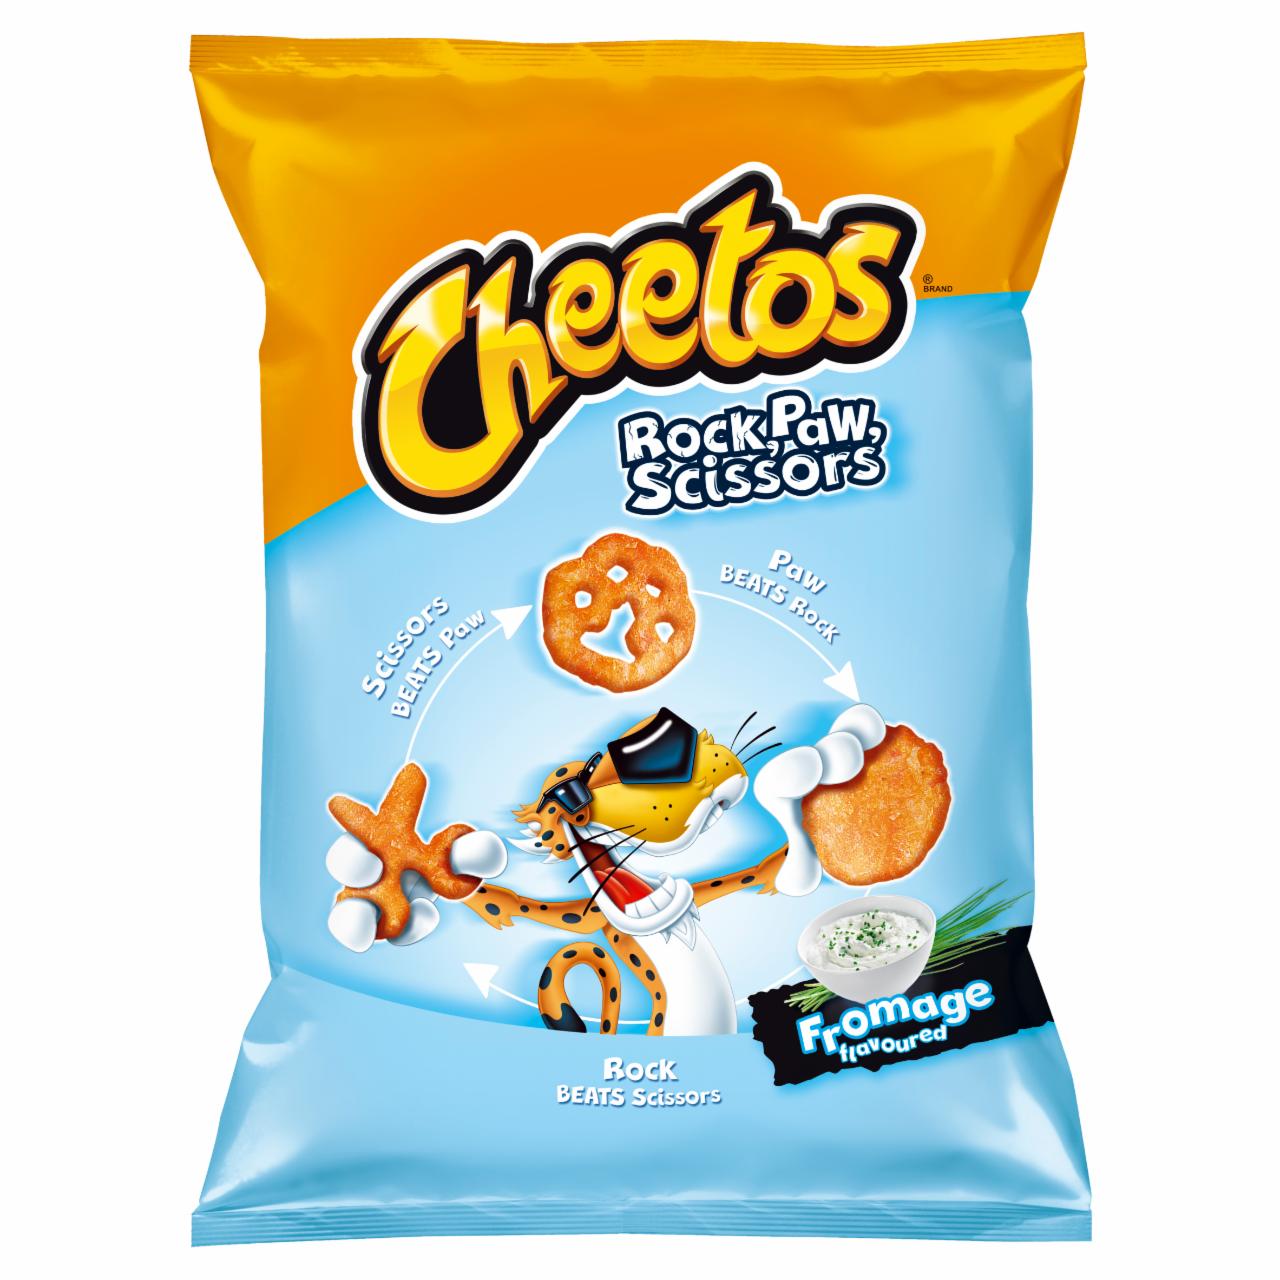 Photo - Cheetos Rock, Paw, Scissors Fromage Flavoured Corn Snacks 85 g